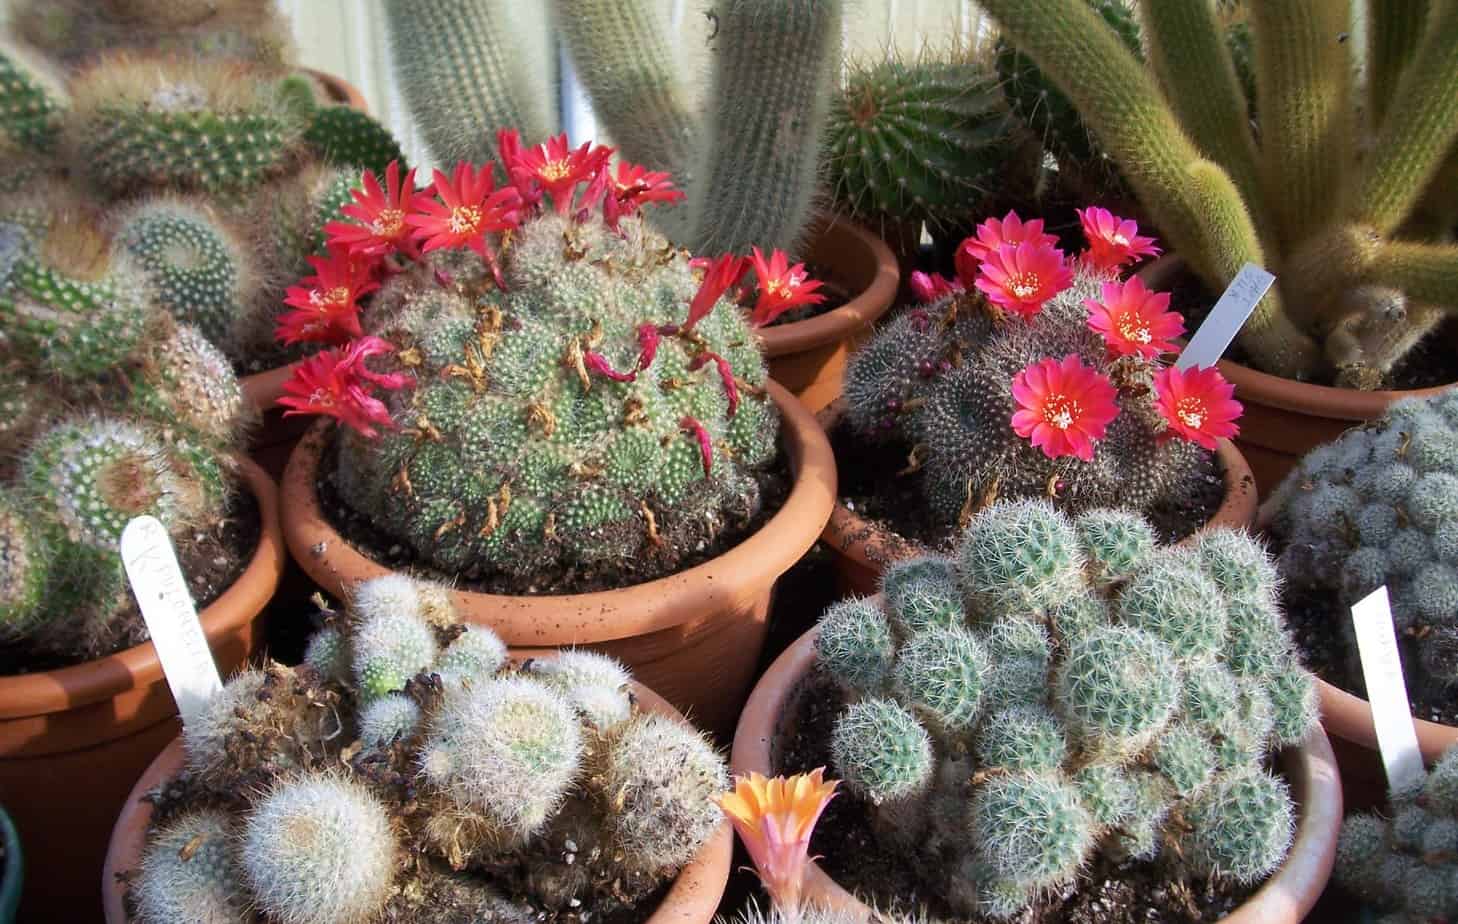 How To Take Care Of A Cactus With/deco Flower Easy To Grow Flowering Cactus | Plantly